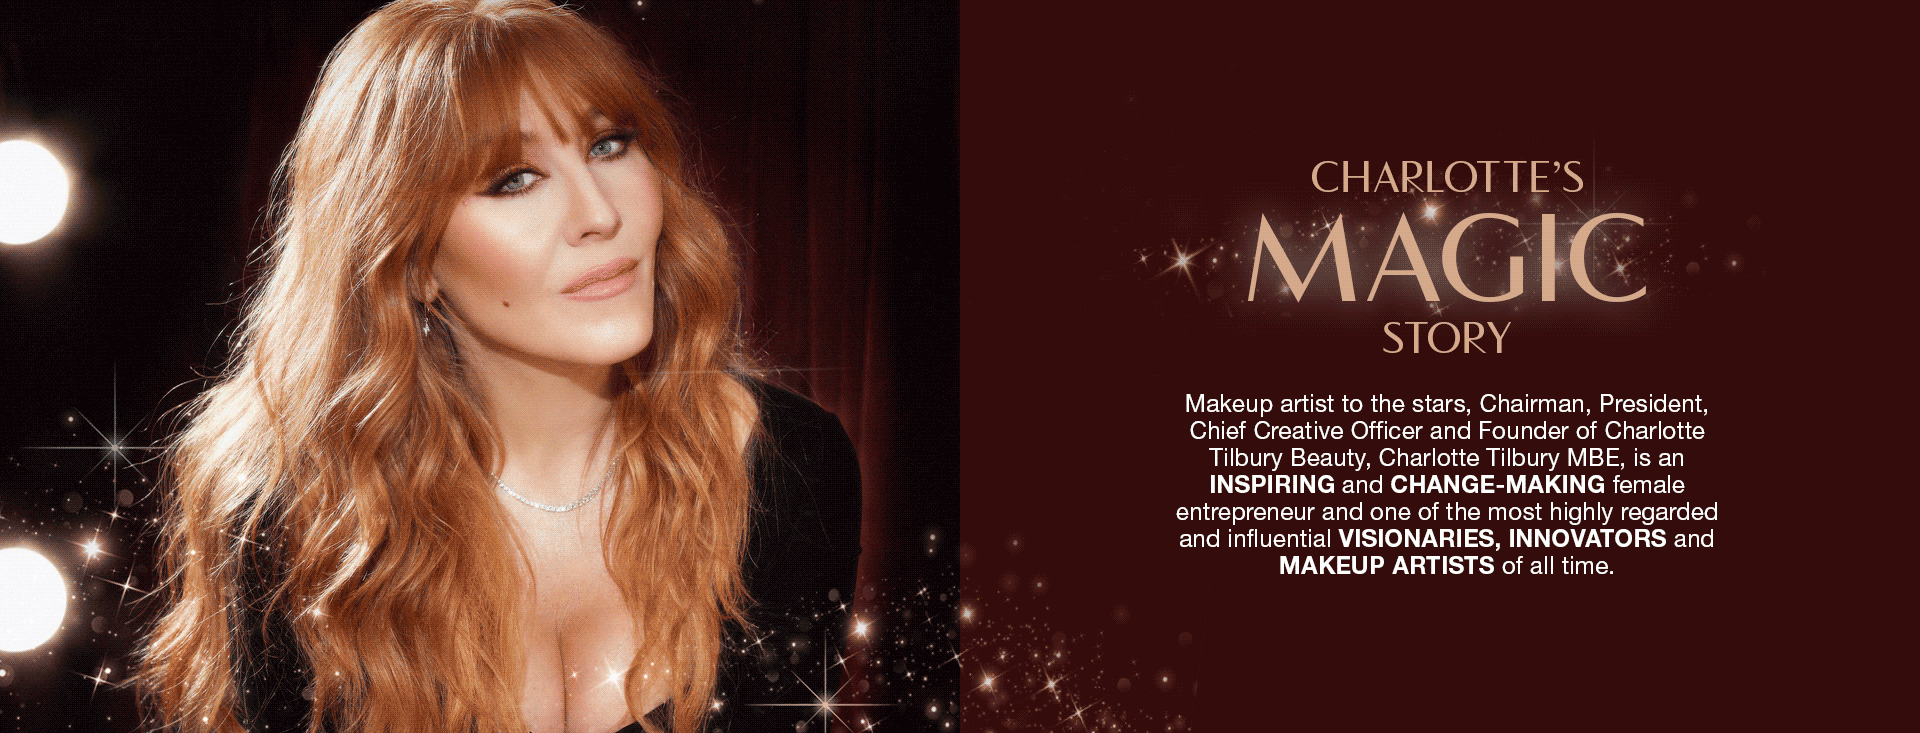 Banner with Charlotte Tilbury wearing soft, nude peach makeup with glowy, bronzed skin with a black-coloured dress, along with text on the banner that reads,'Charlotte's Magic story!'